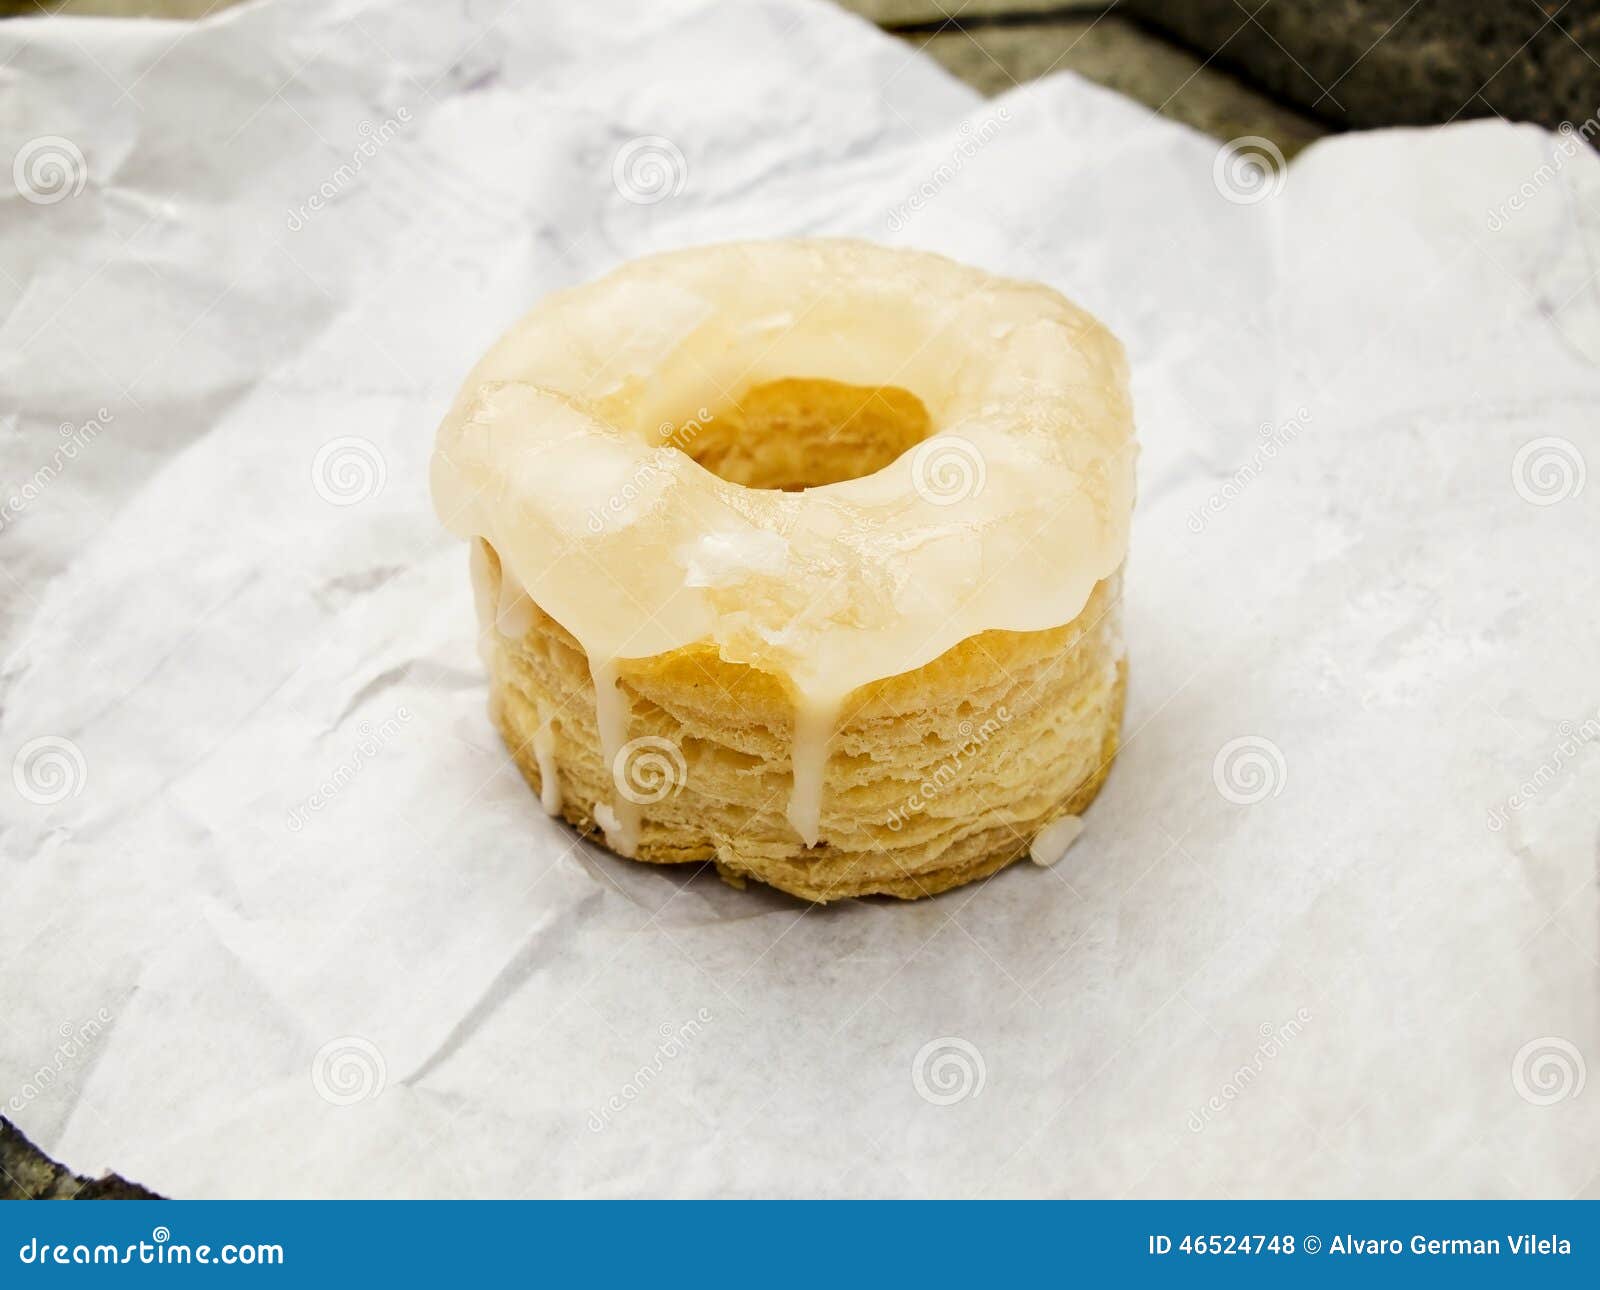 cronut with white glassed.